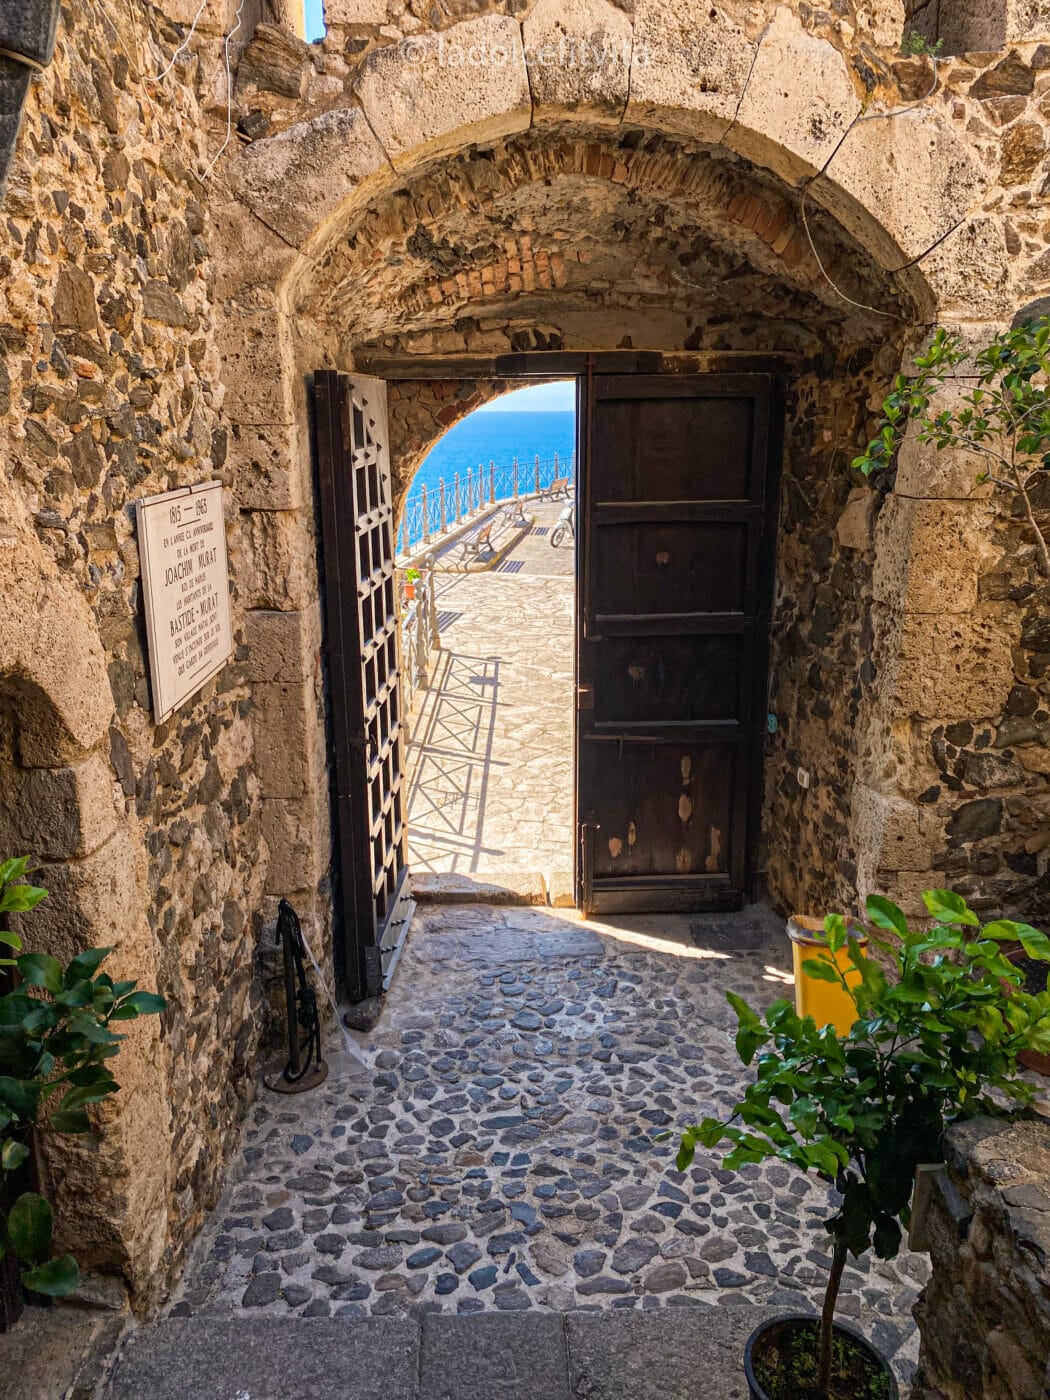 the view of a vibrant turquoise sea as seen through an open door in a courtyard in southern Italy